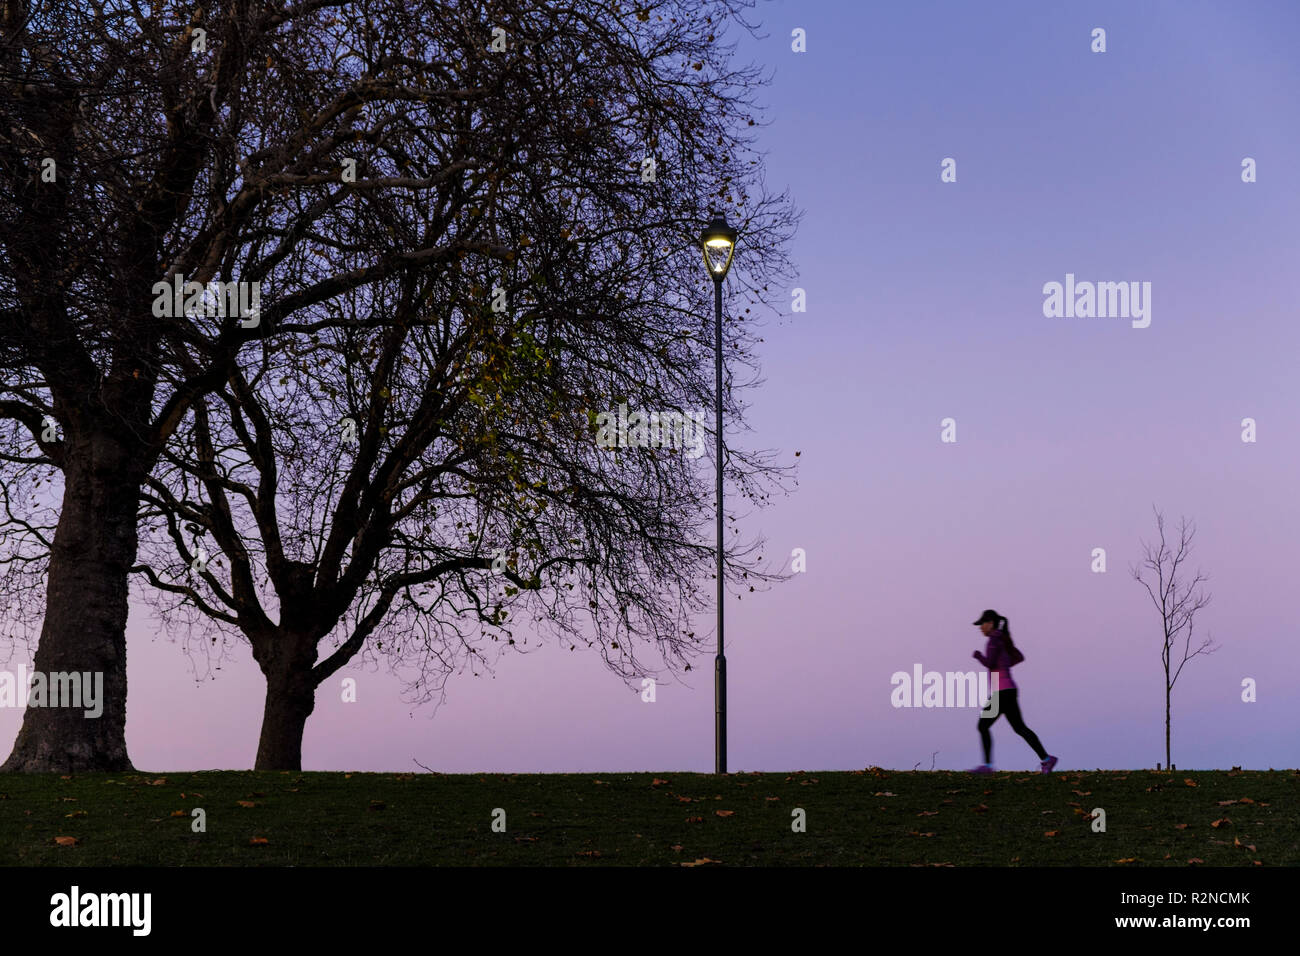 Person training. Woman running or jogging in a park at night, Nottingham, England, UK Stock Photo